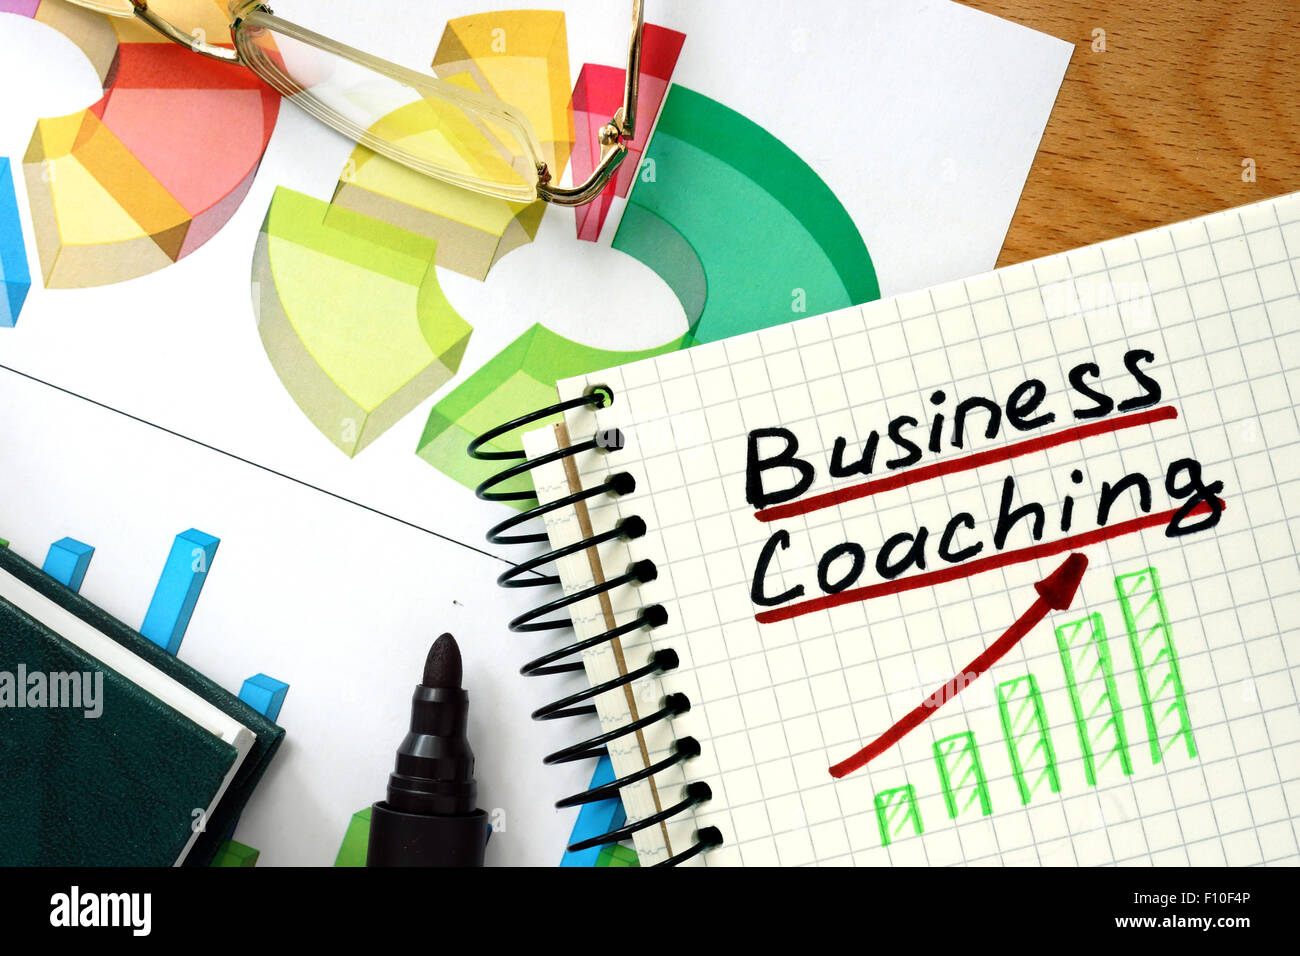 Note with words business coaching  on a wooden background. Stock Photo